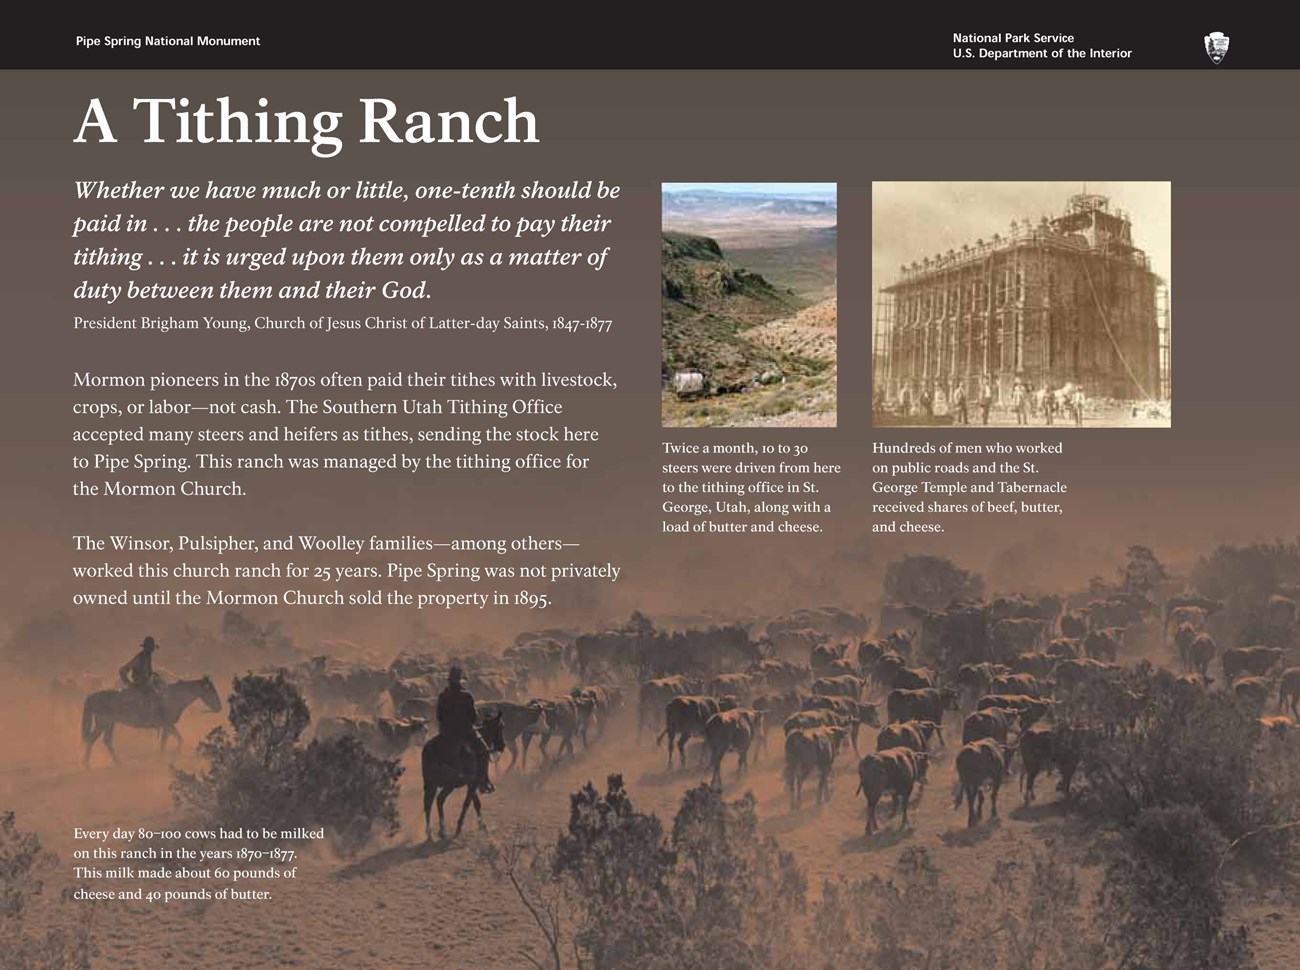 A Tithing Ranch